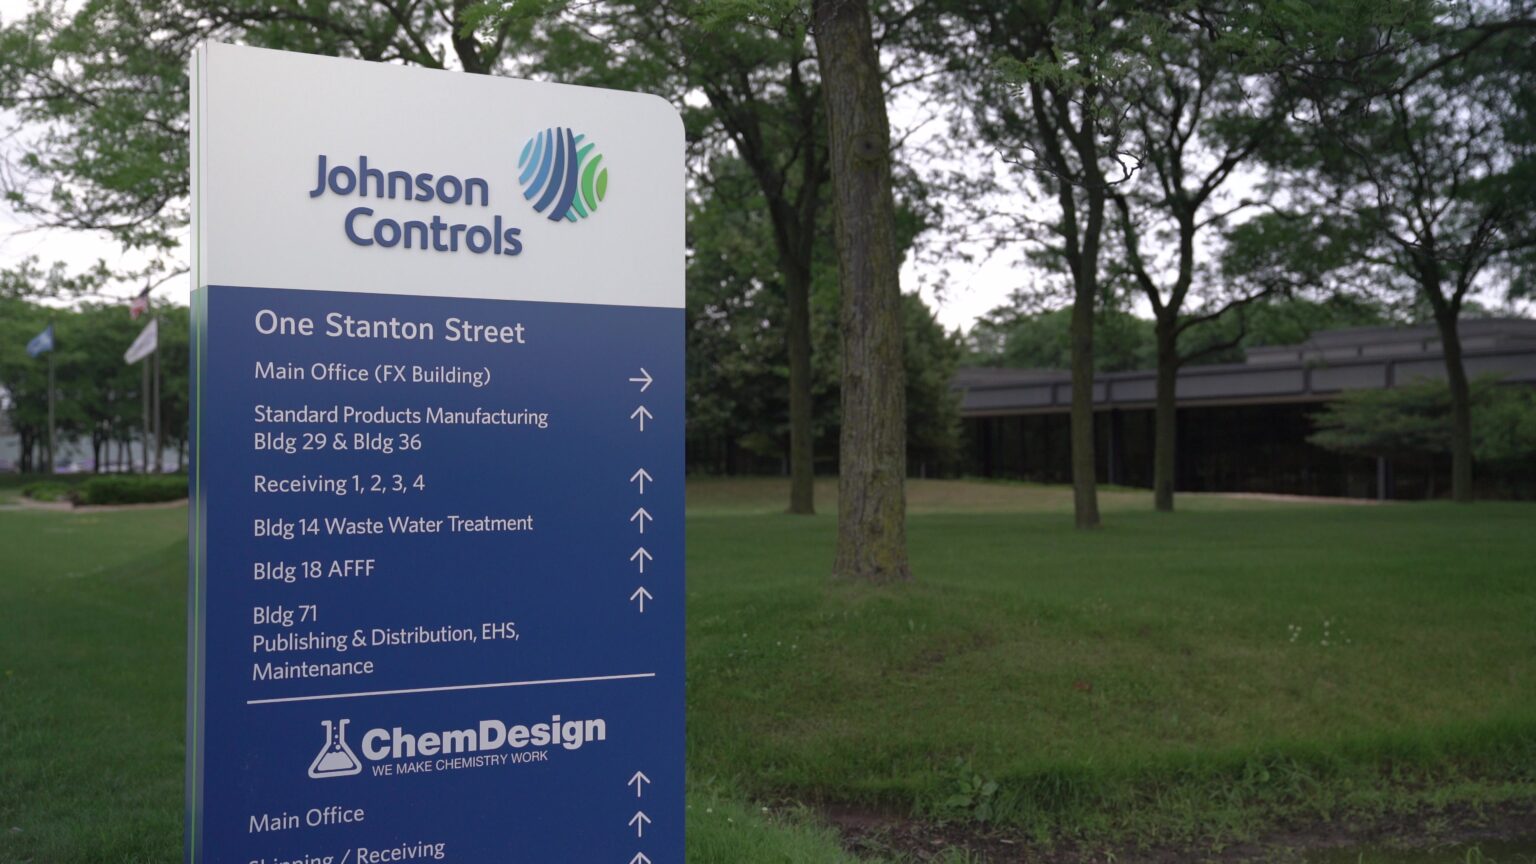 A sign with the Johnson Controls logo offers directions to different buildings, with trees, flagpoles and a low structure in the background.